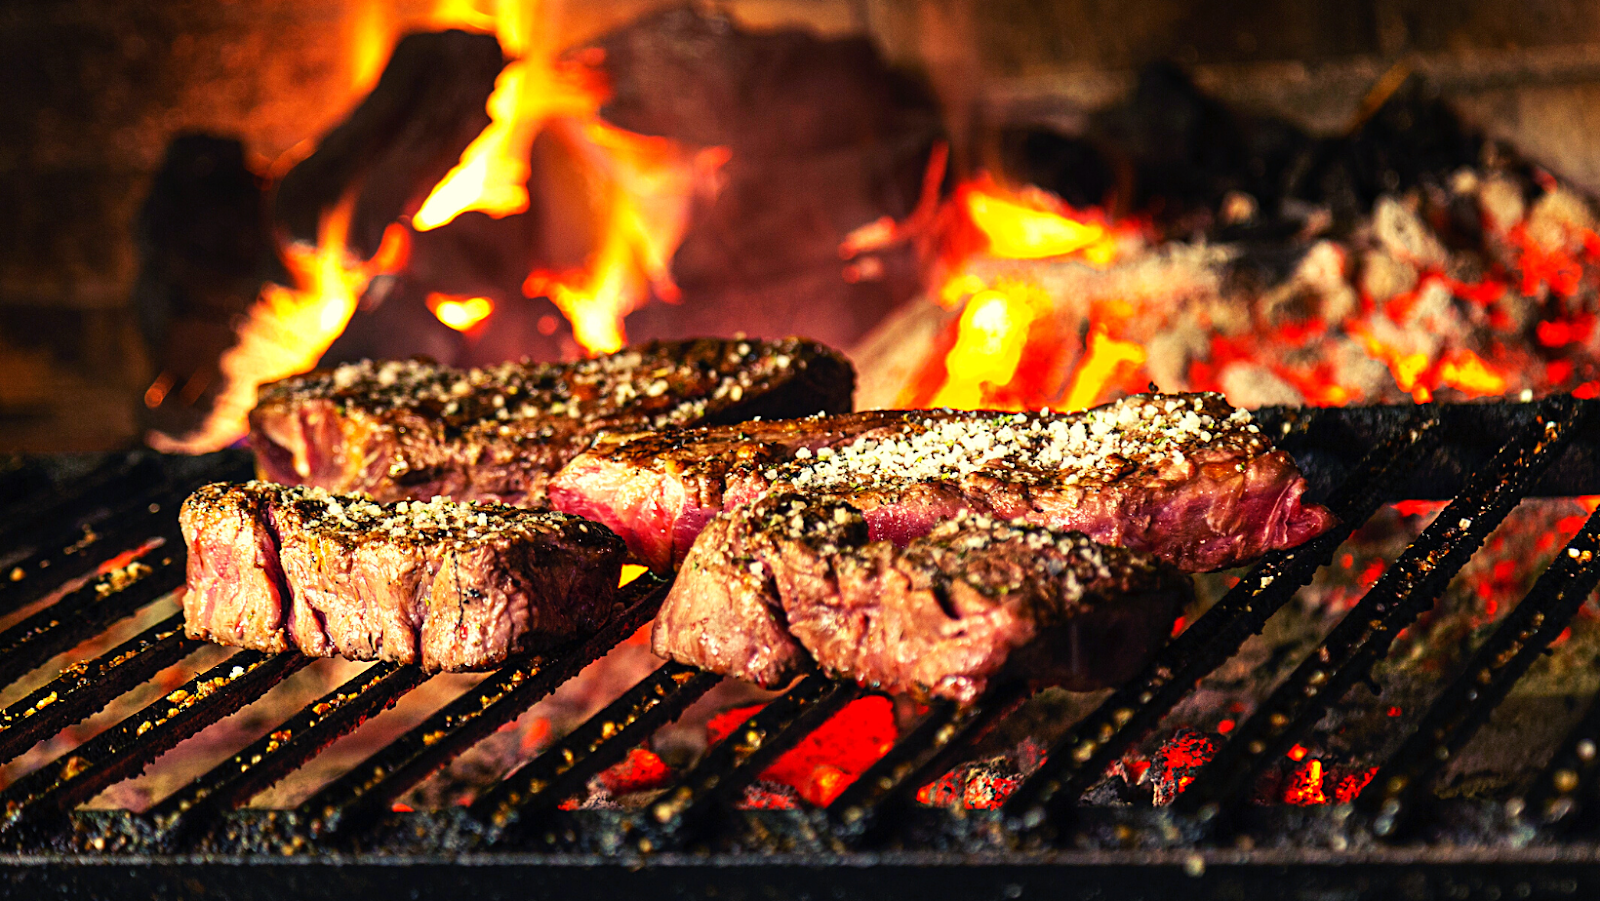 Top 5 Tips For Grilling Outdoors In January